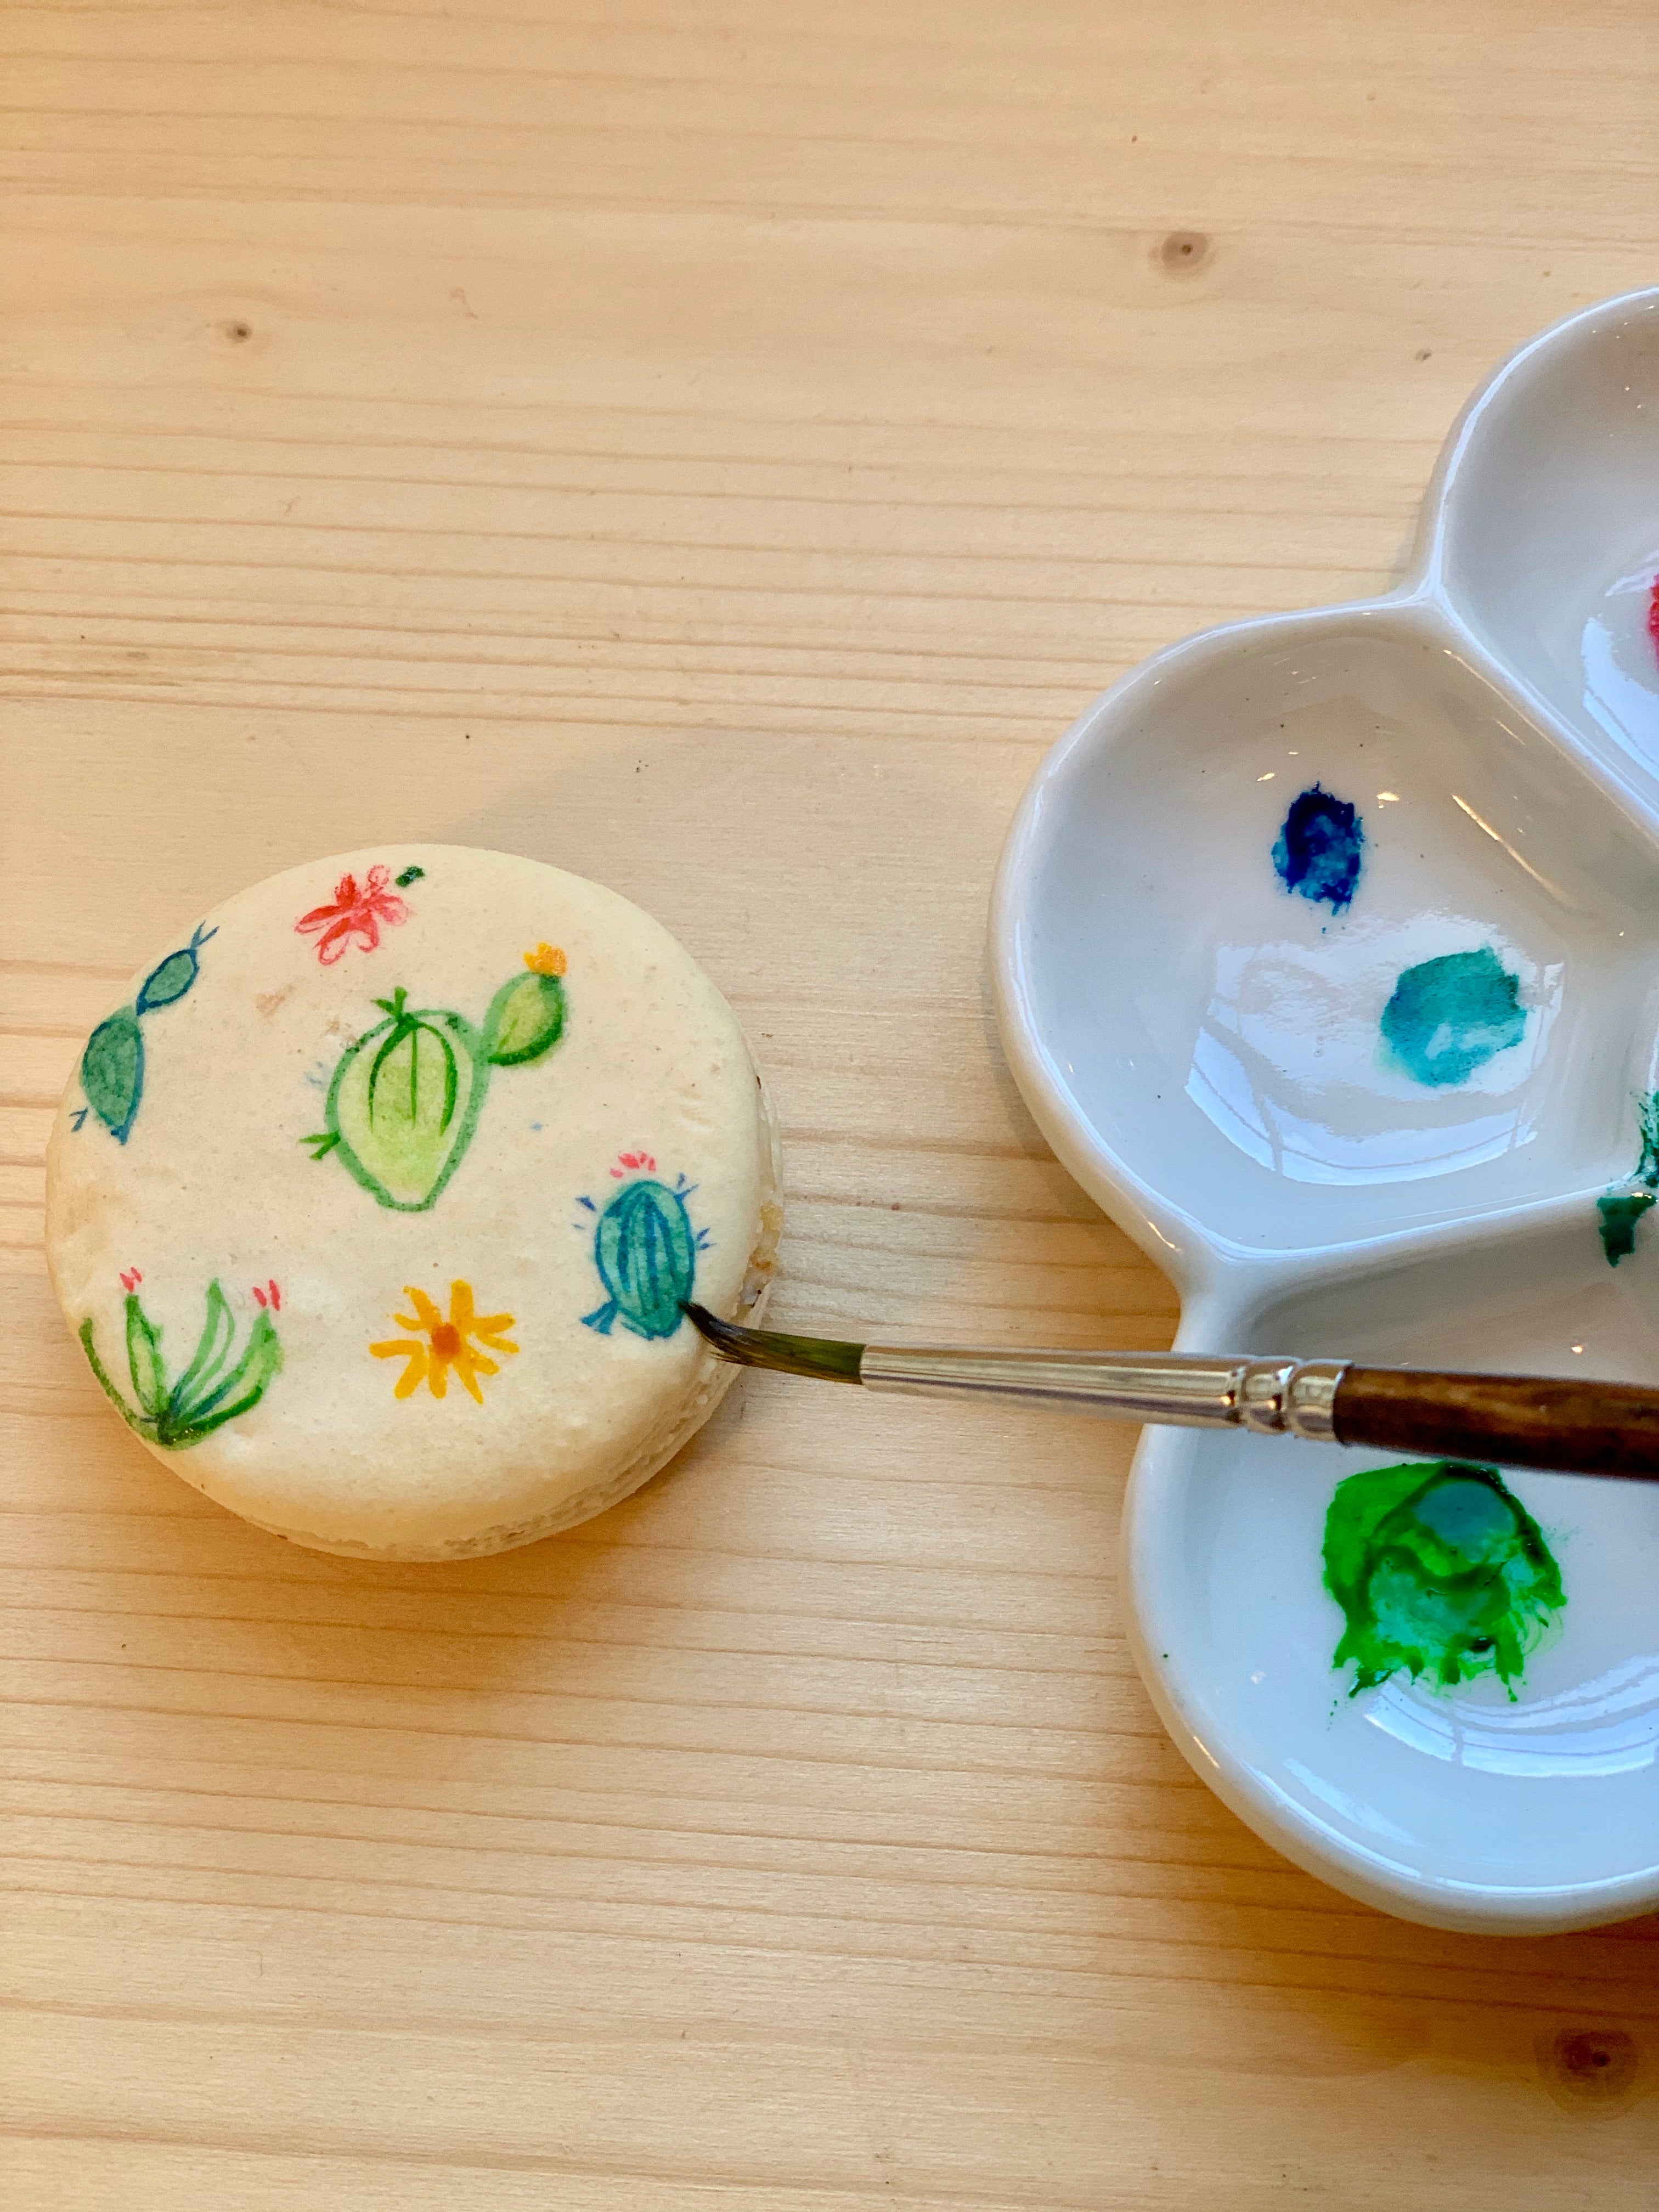 Macaron Painting Workshop - 5 people - February 20th